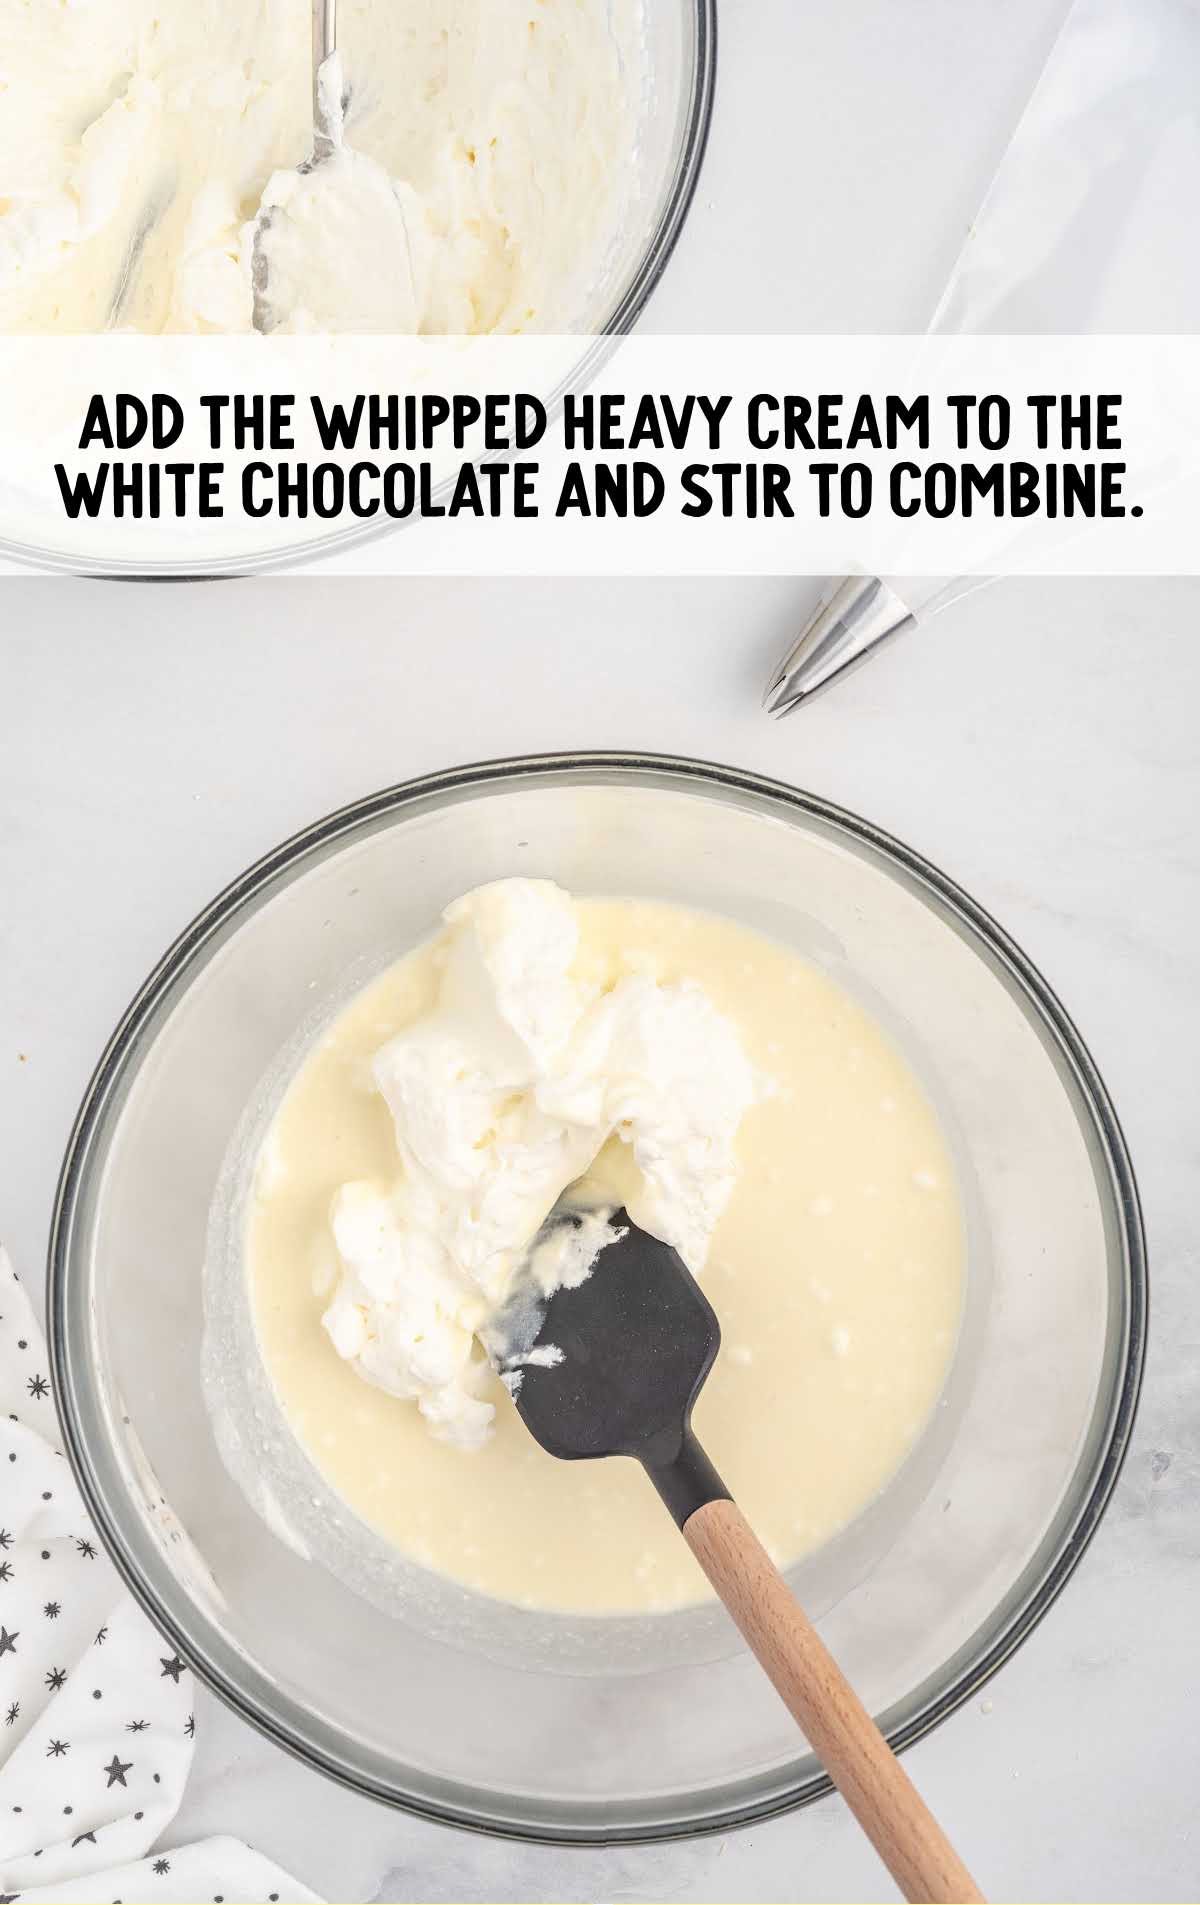 whipped heavy cream added to the white chocolate and stirred in a bowl